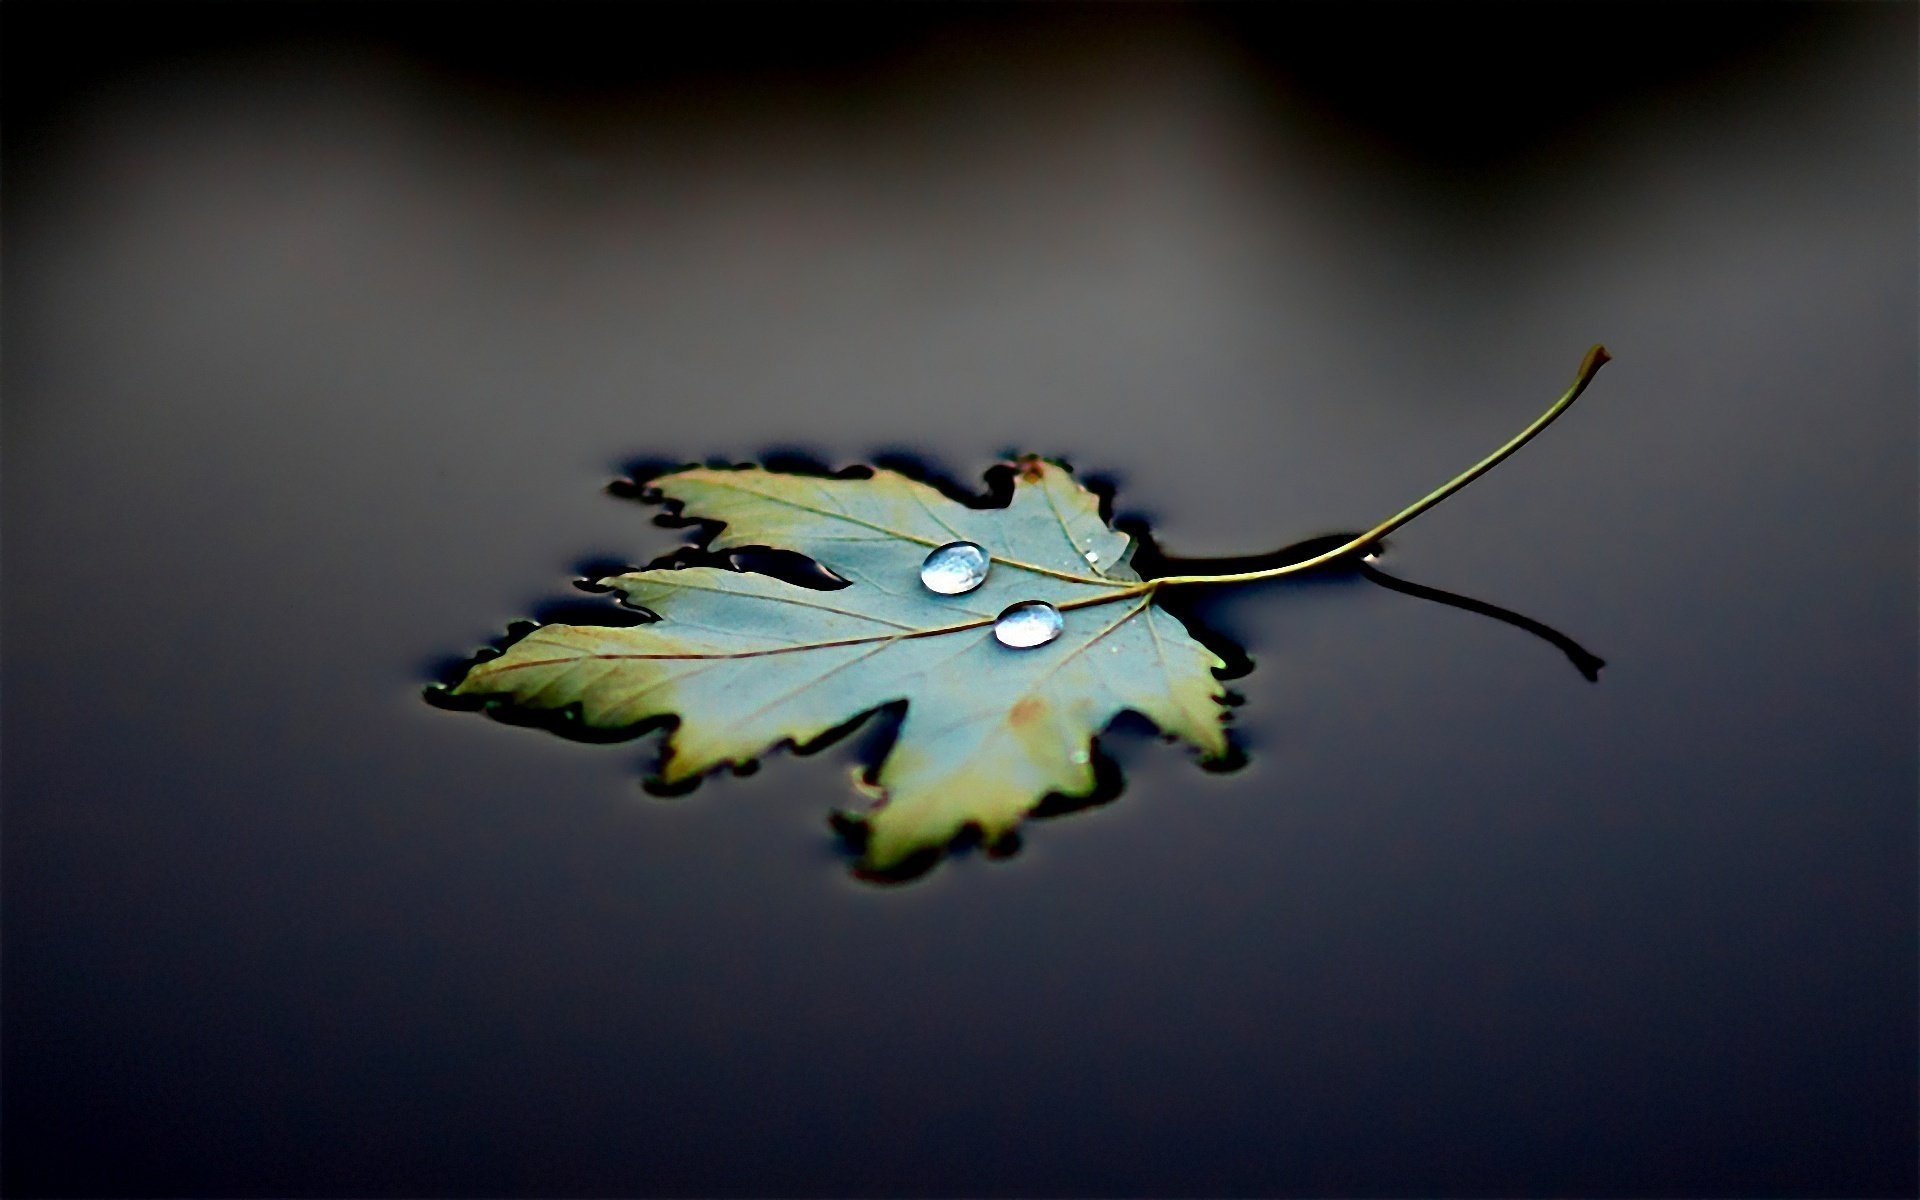 A leaf on the water with drops of bokeh